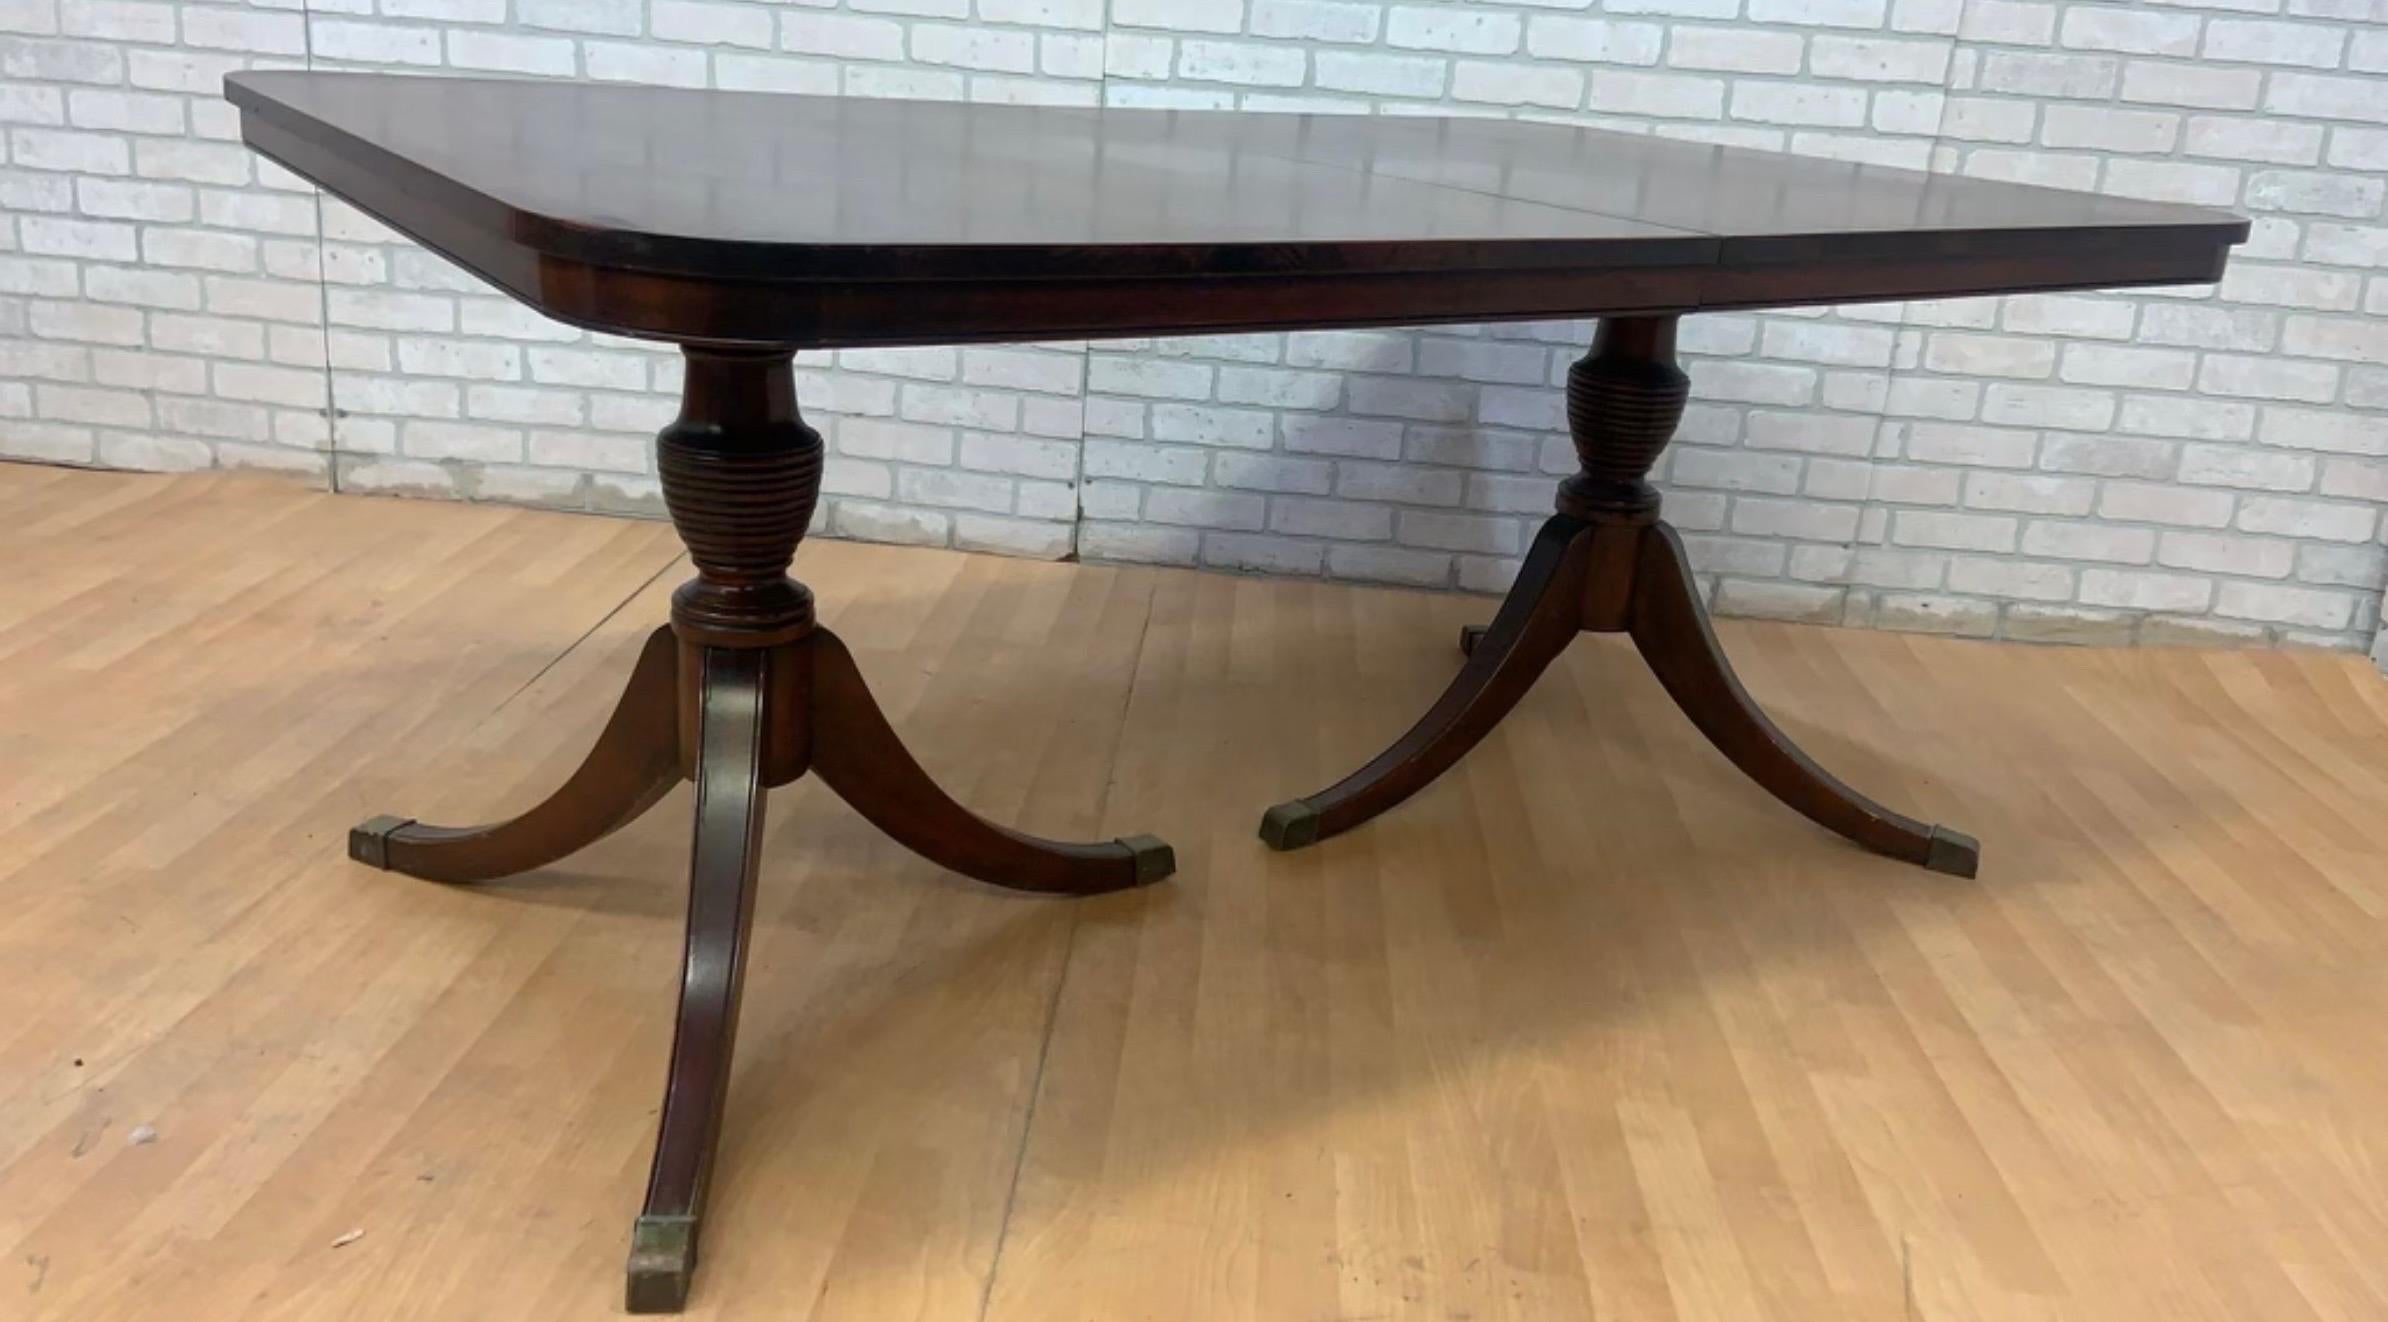 Antique Regency Duncan Phyfe Style Mahogany Dining Table w/ 3 Leaves In Good Condition For Sale In Chicago, IL